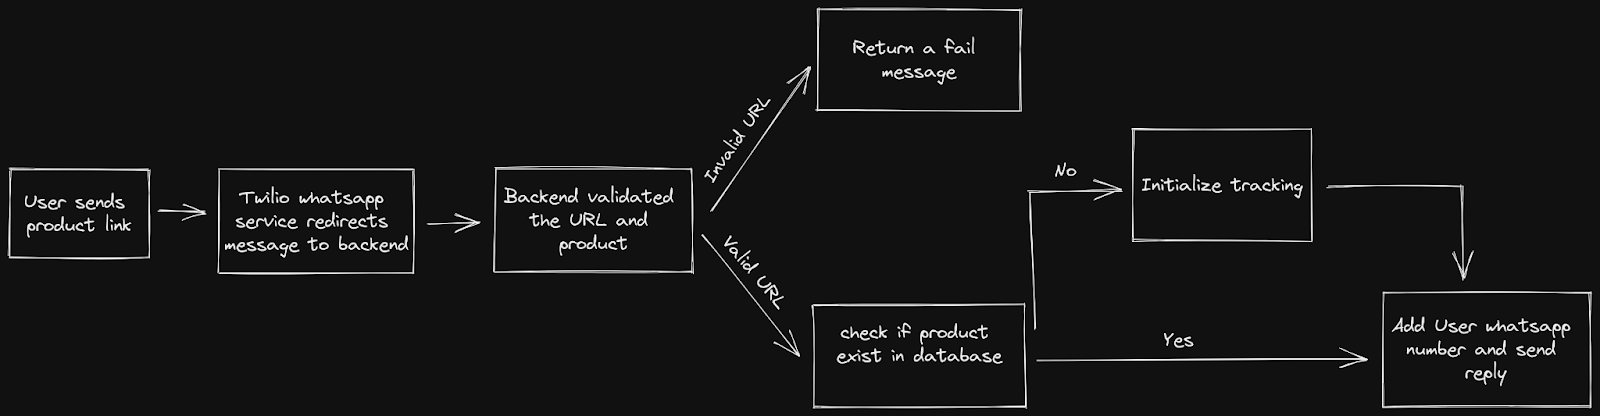 Product tracking workflow